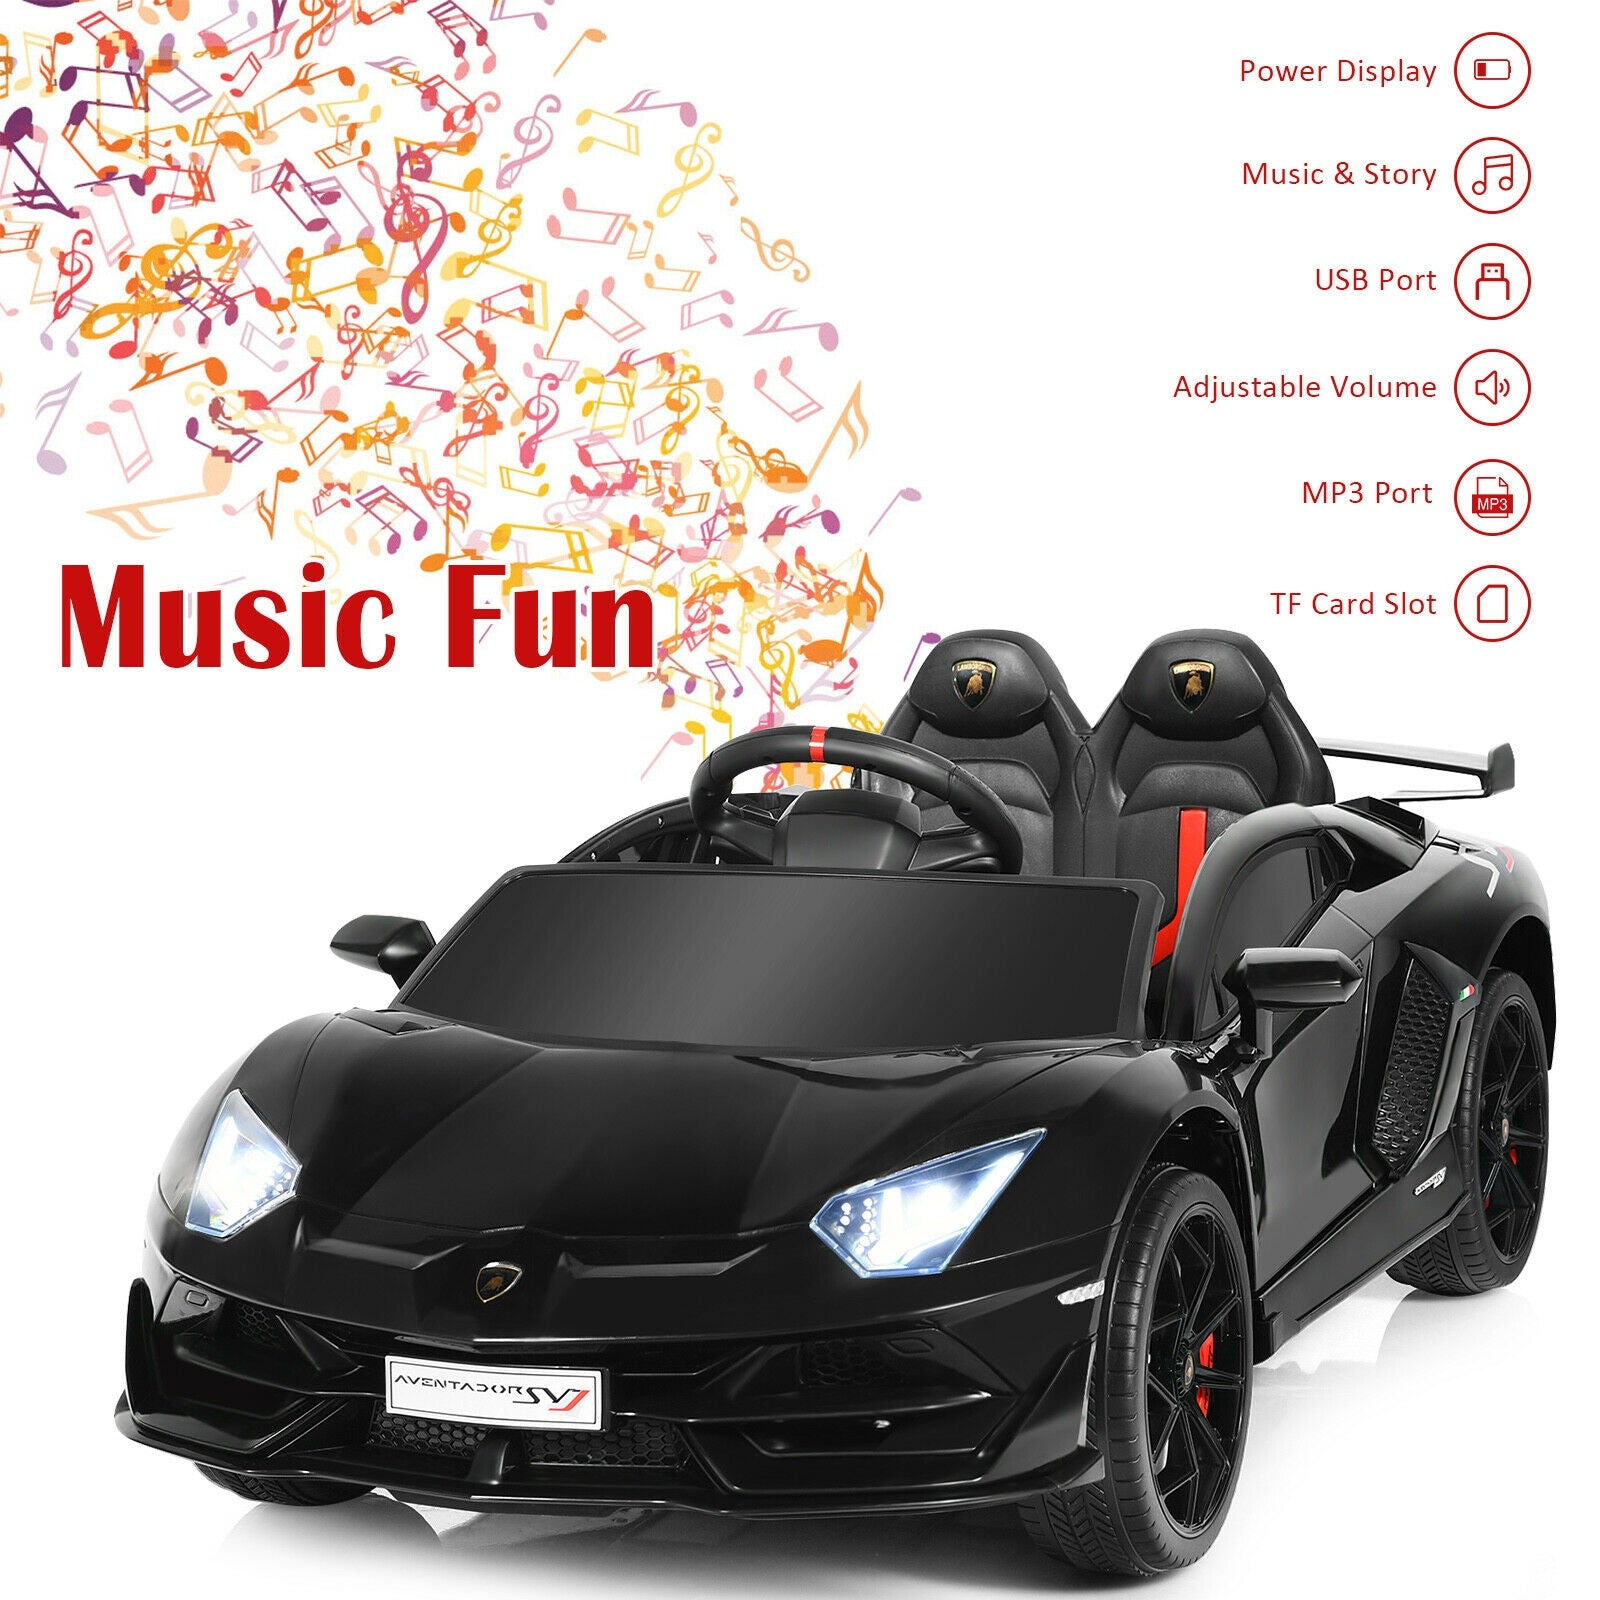 Abundant Features for Unlimited Joy: To keep the excitement going, we've designed this ride-on car with a range of entertaining features. Vibrant LED lights and attention-catching horns add playful charm, while dynamic music injects energy into their playtime. The included USB port and TF slot allow for customizable music selection.